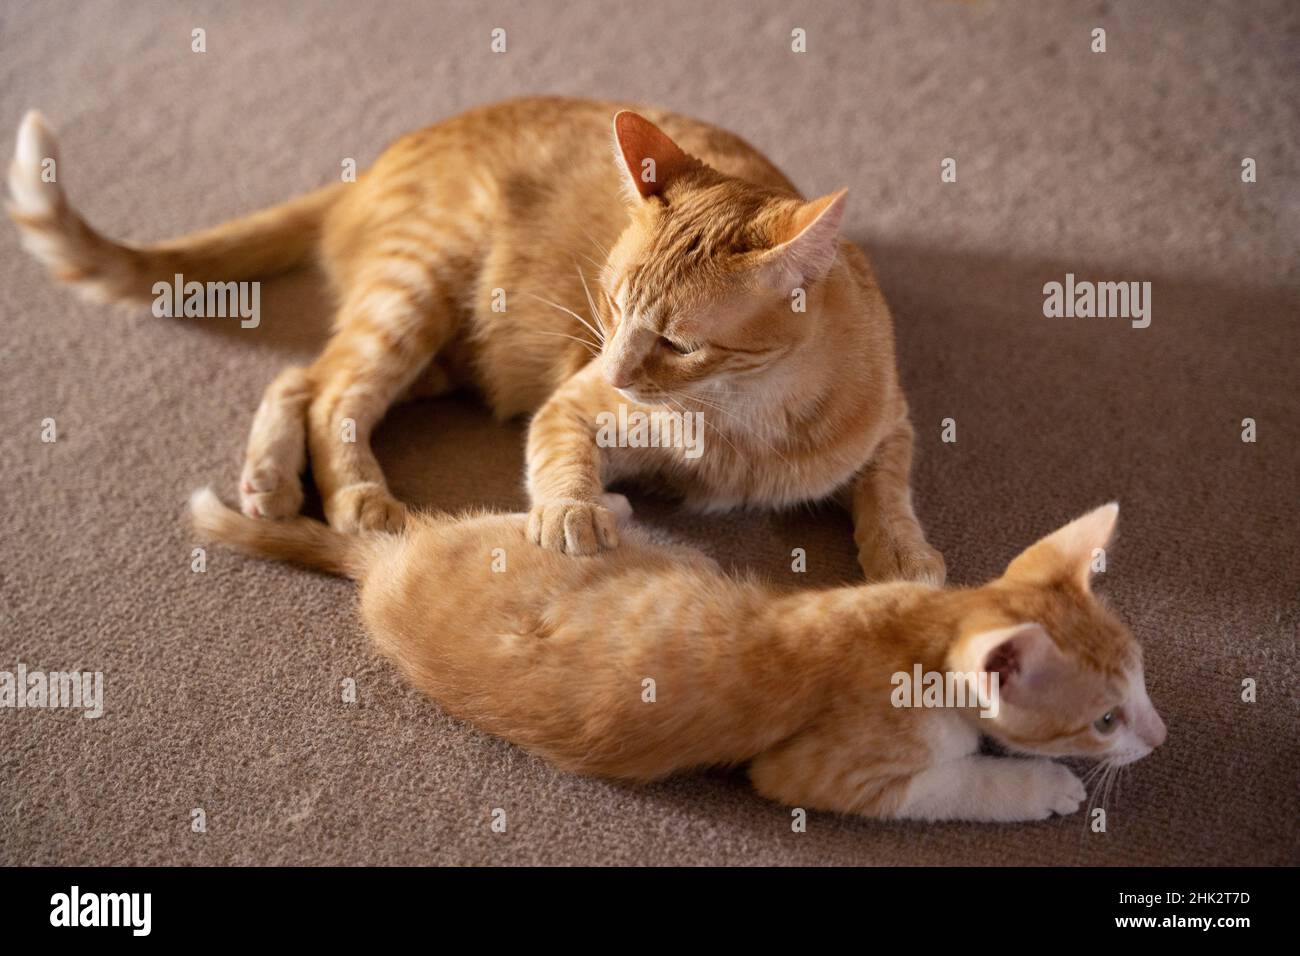 Closeup of the cute ginger cat playing with its kitten on the floor. Stock Photo